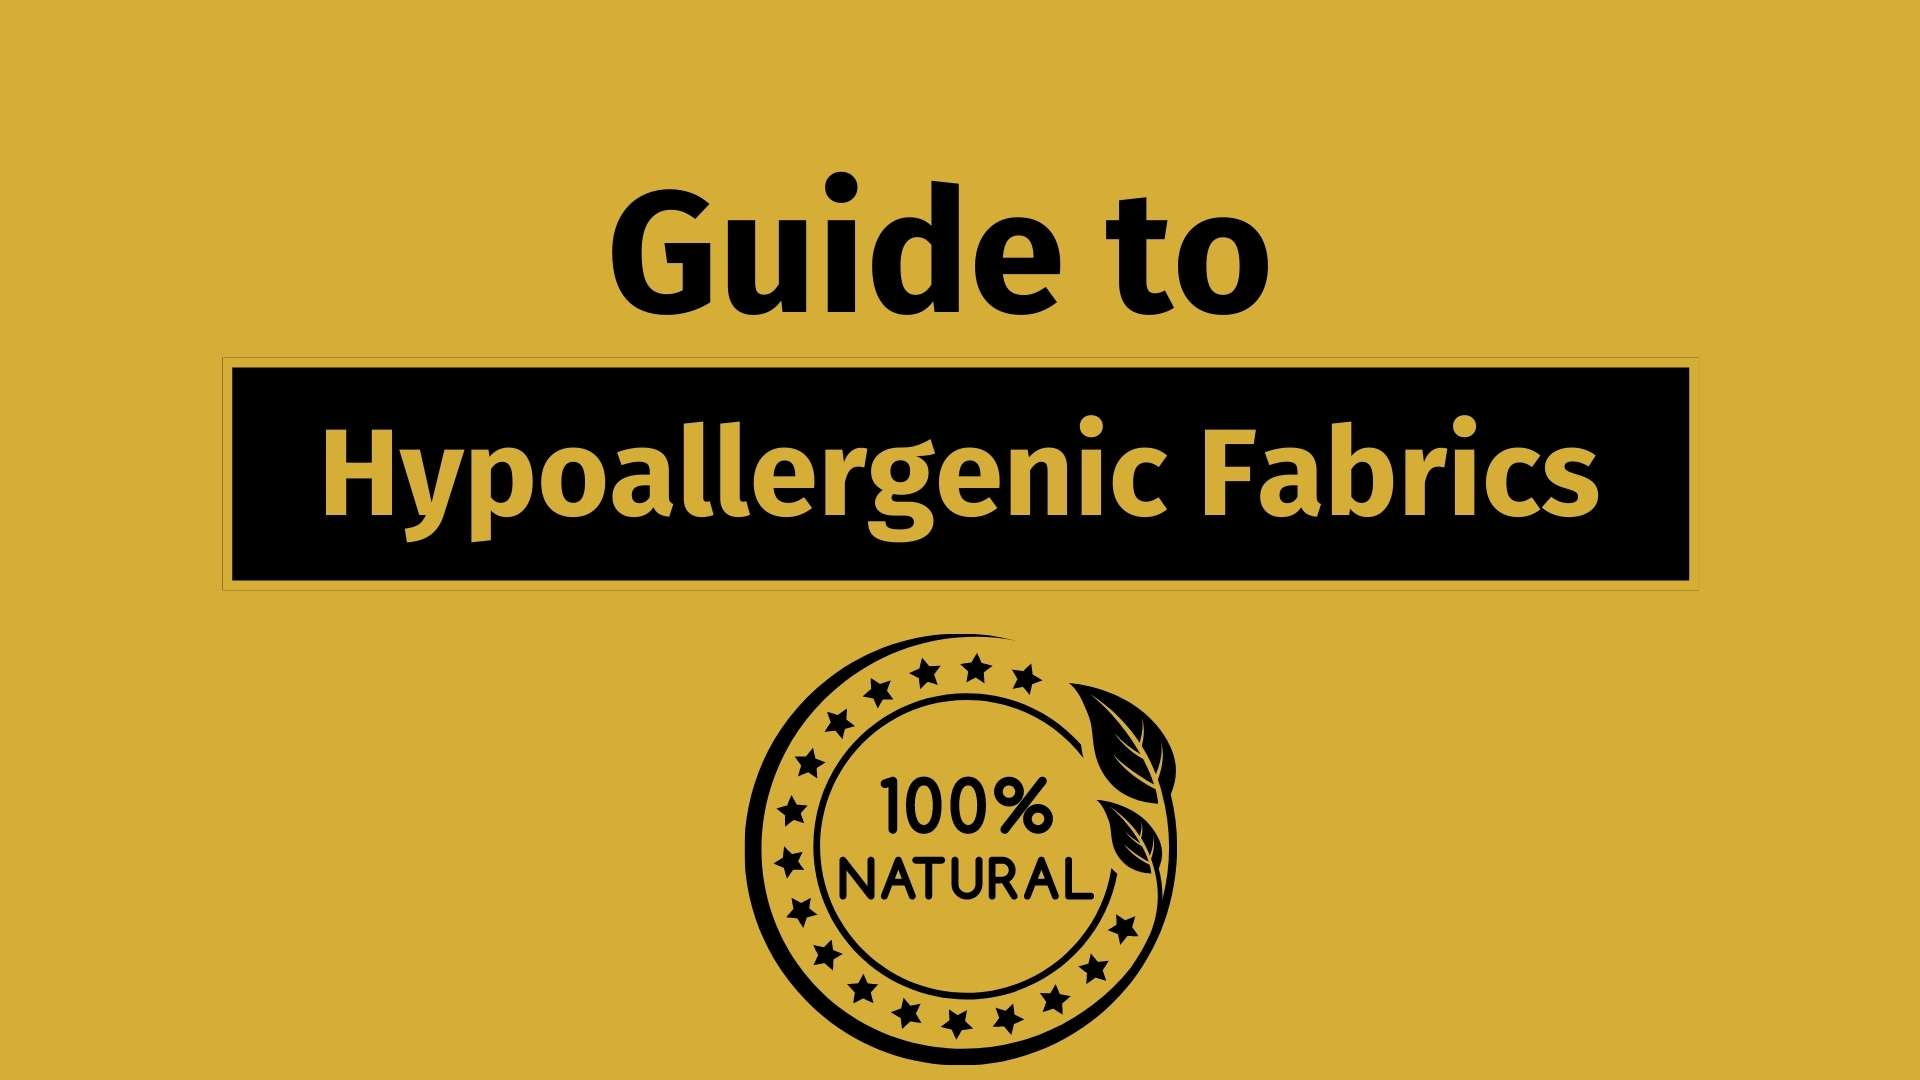 guide to hypoallergenic fabrics banner image